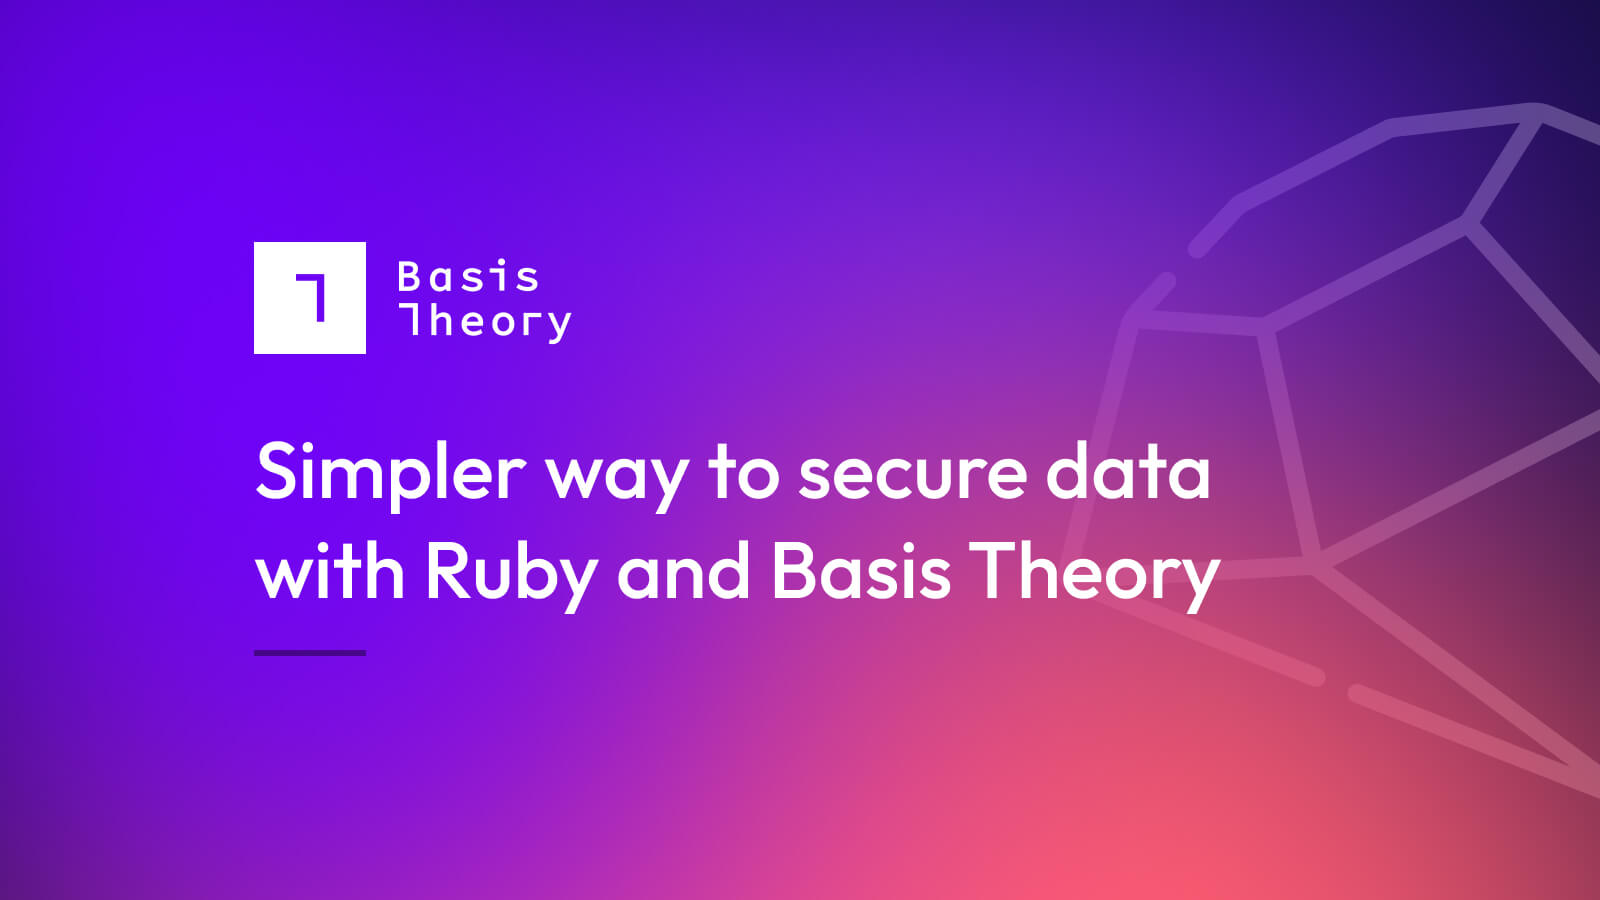 a simpler way to secure data with Ruby and Basis Theory